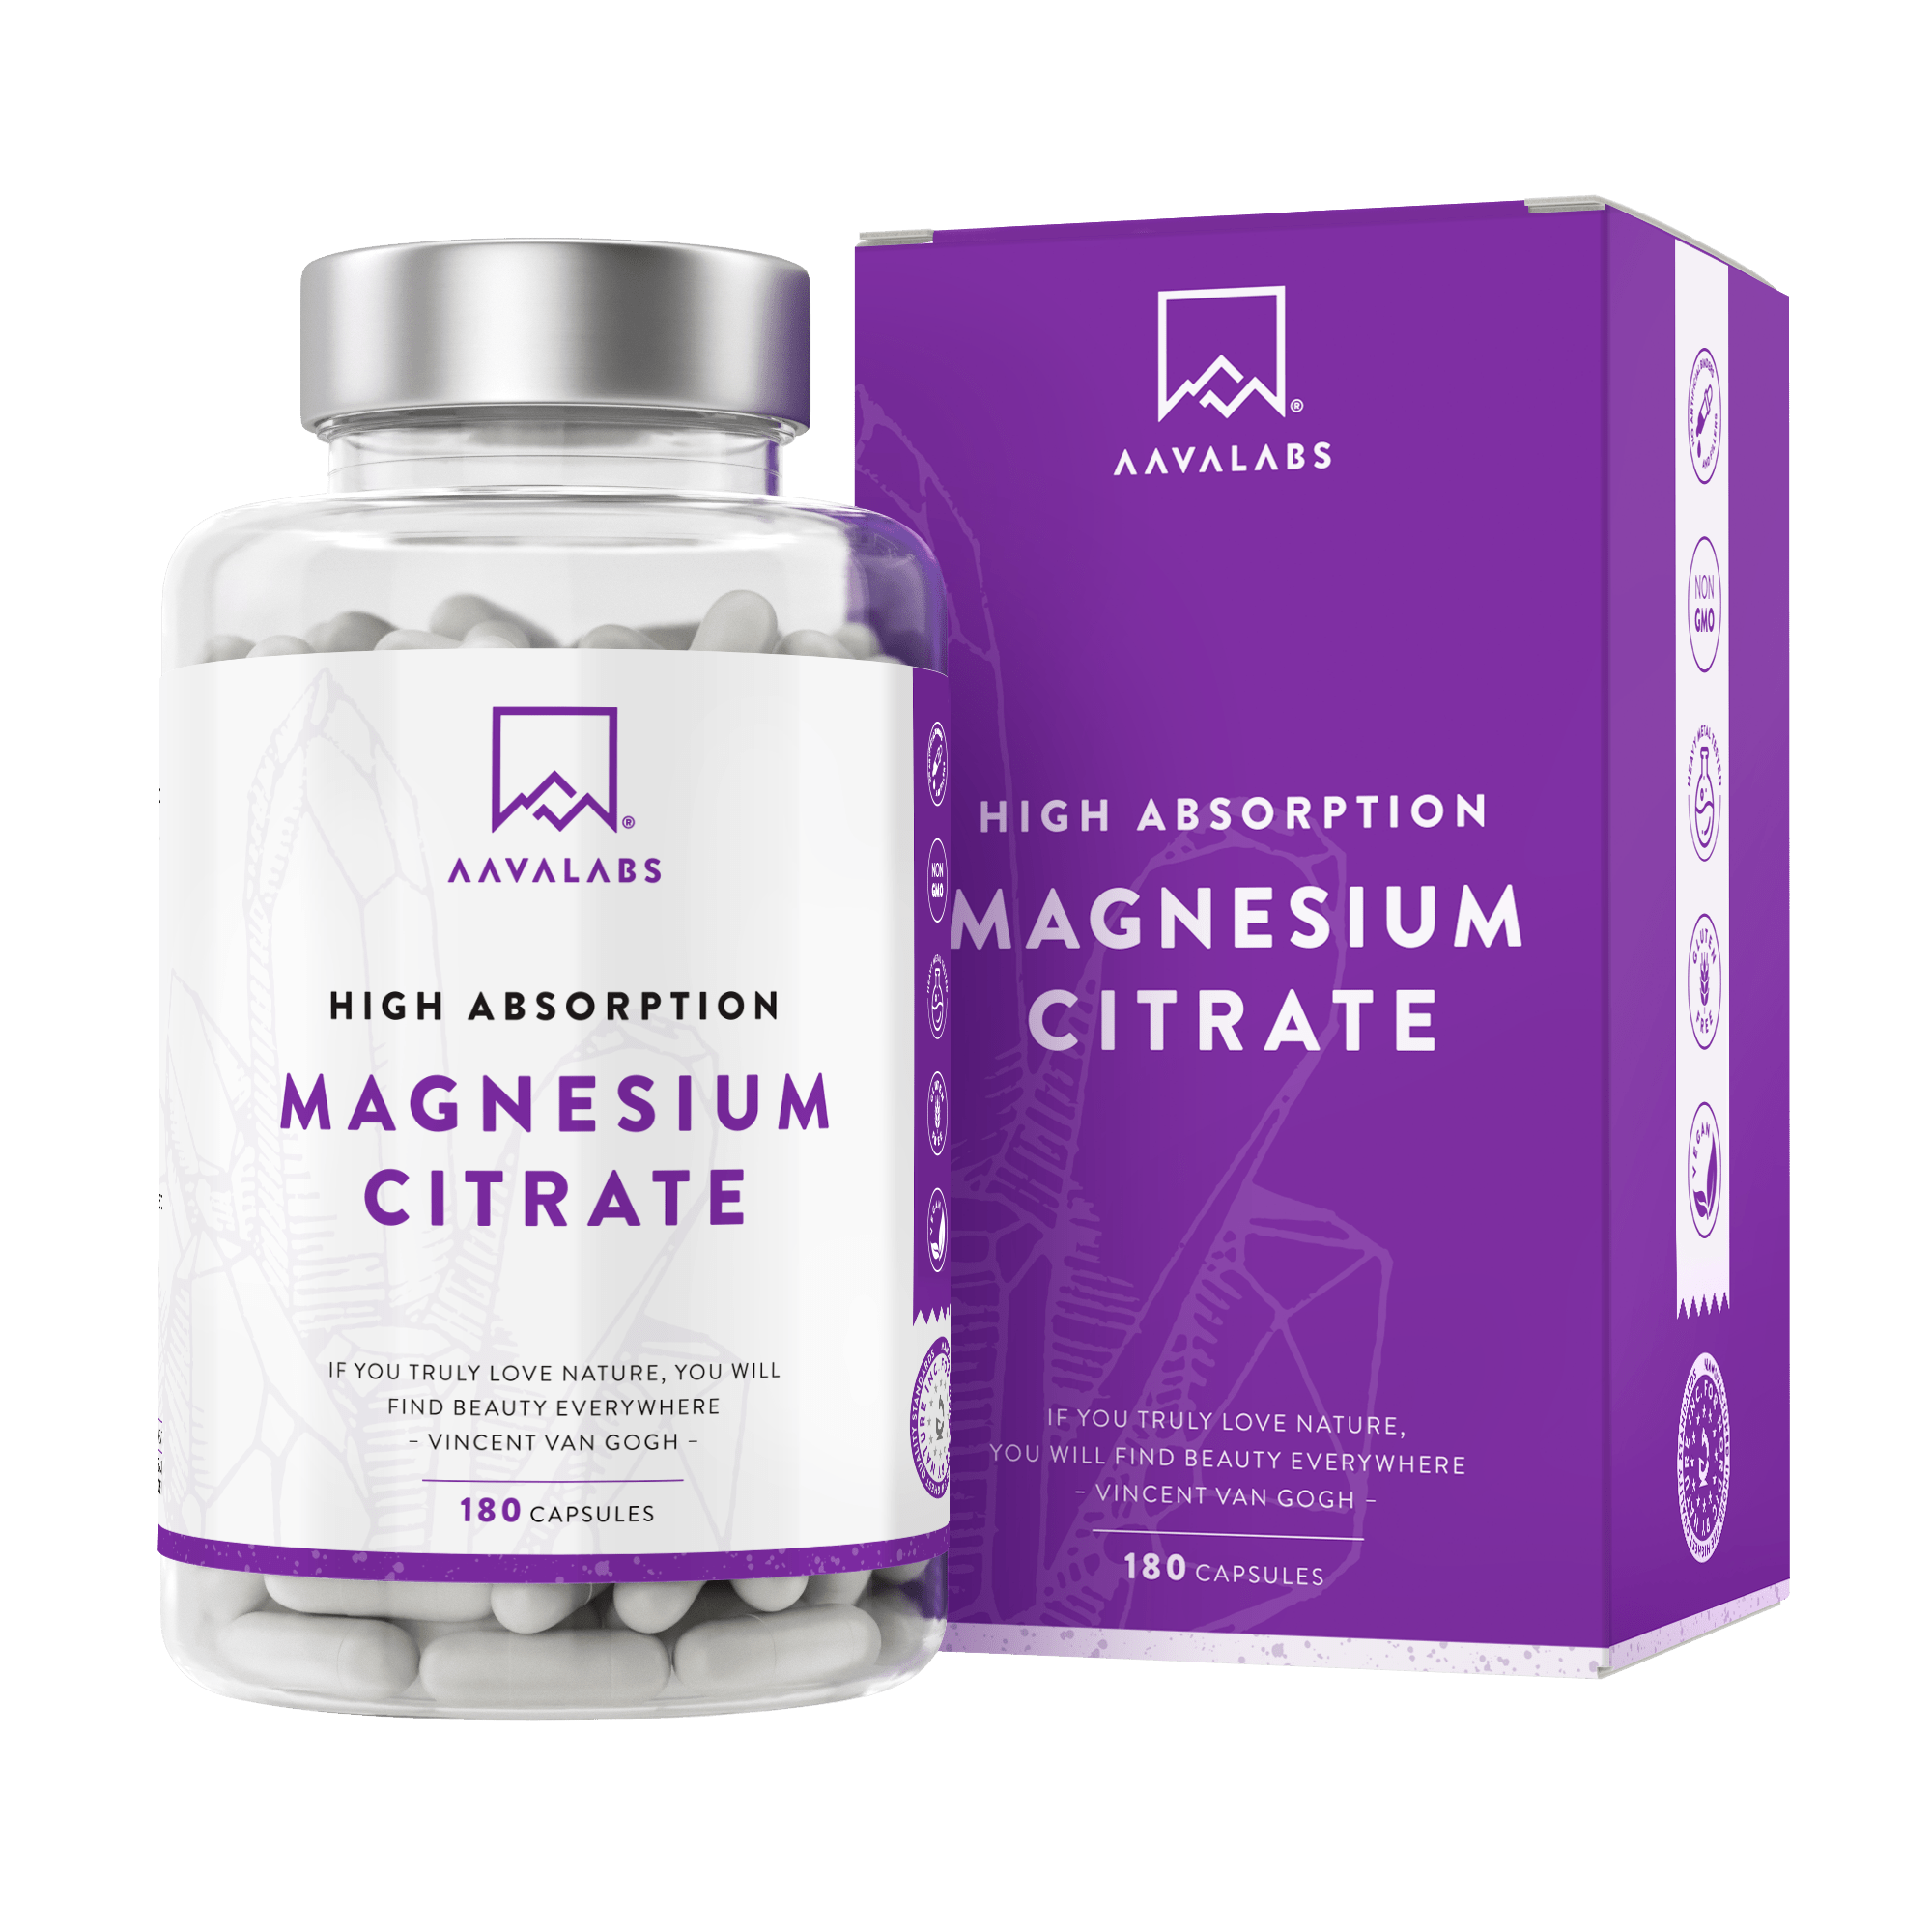 High Absorption Magnesium Citrate with 180 capsules